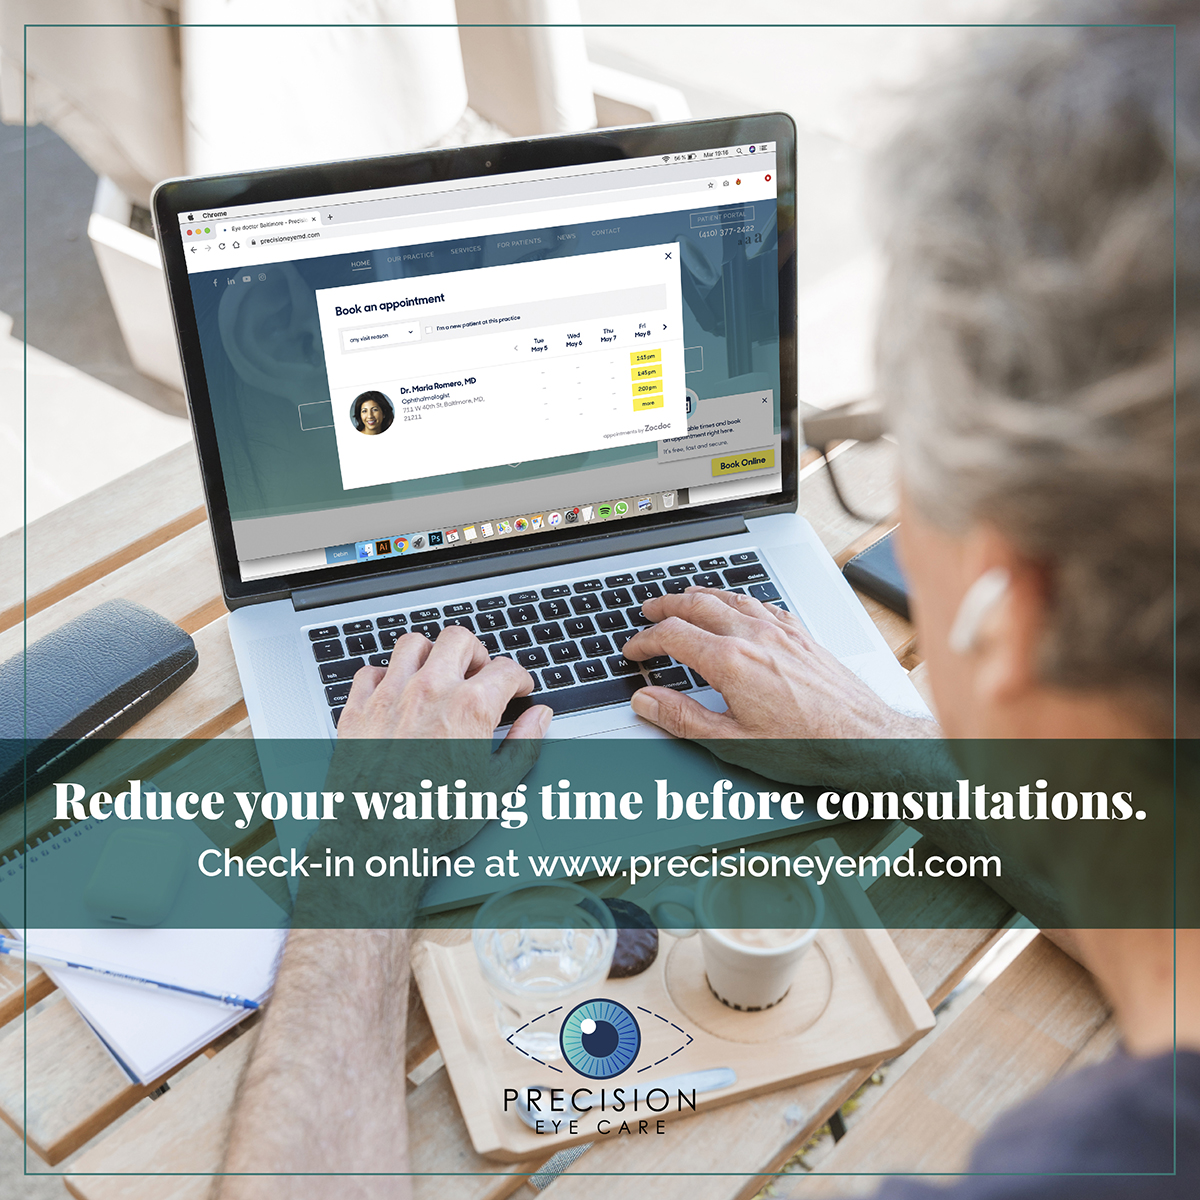 Reduce your waiting time before consultations.